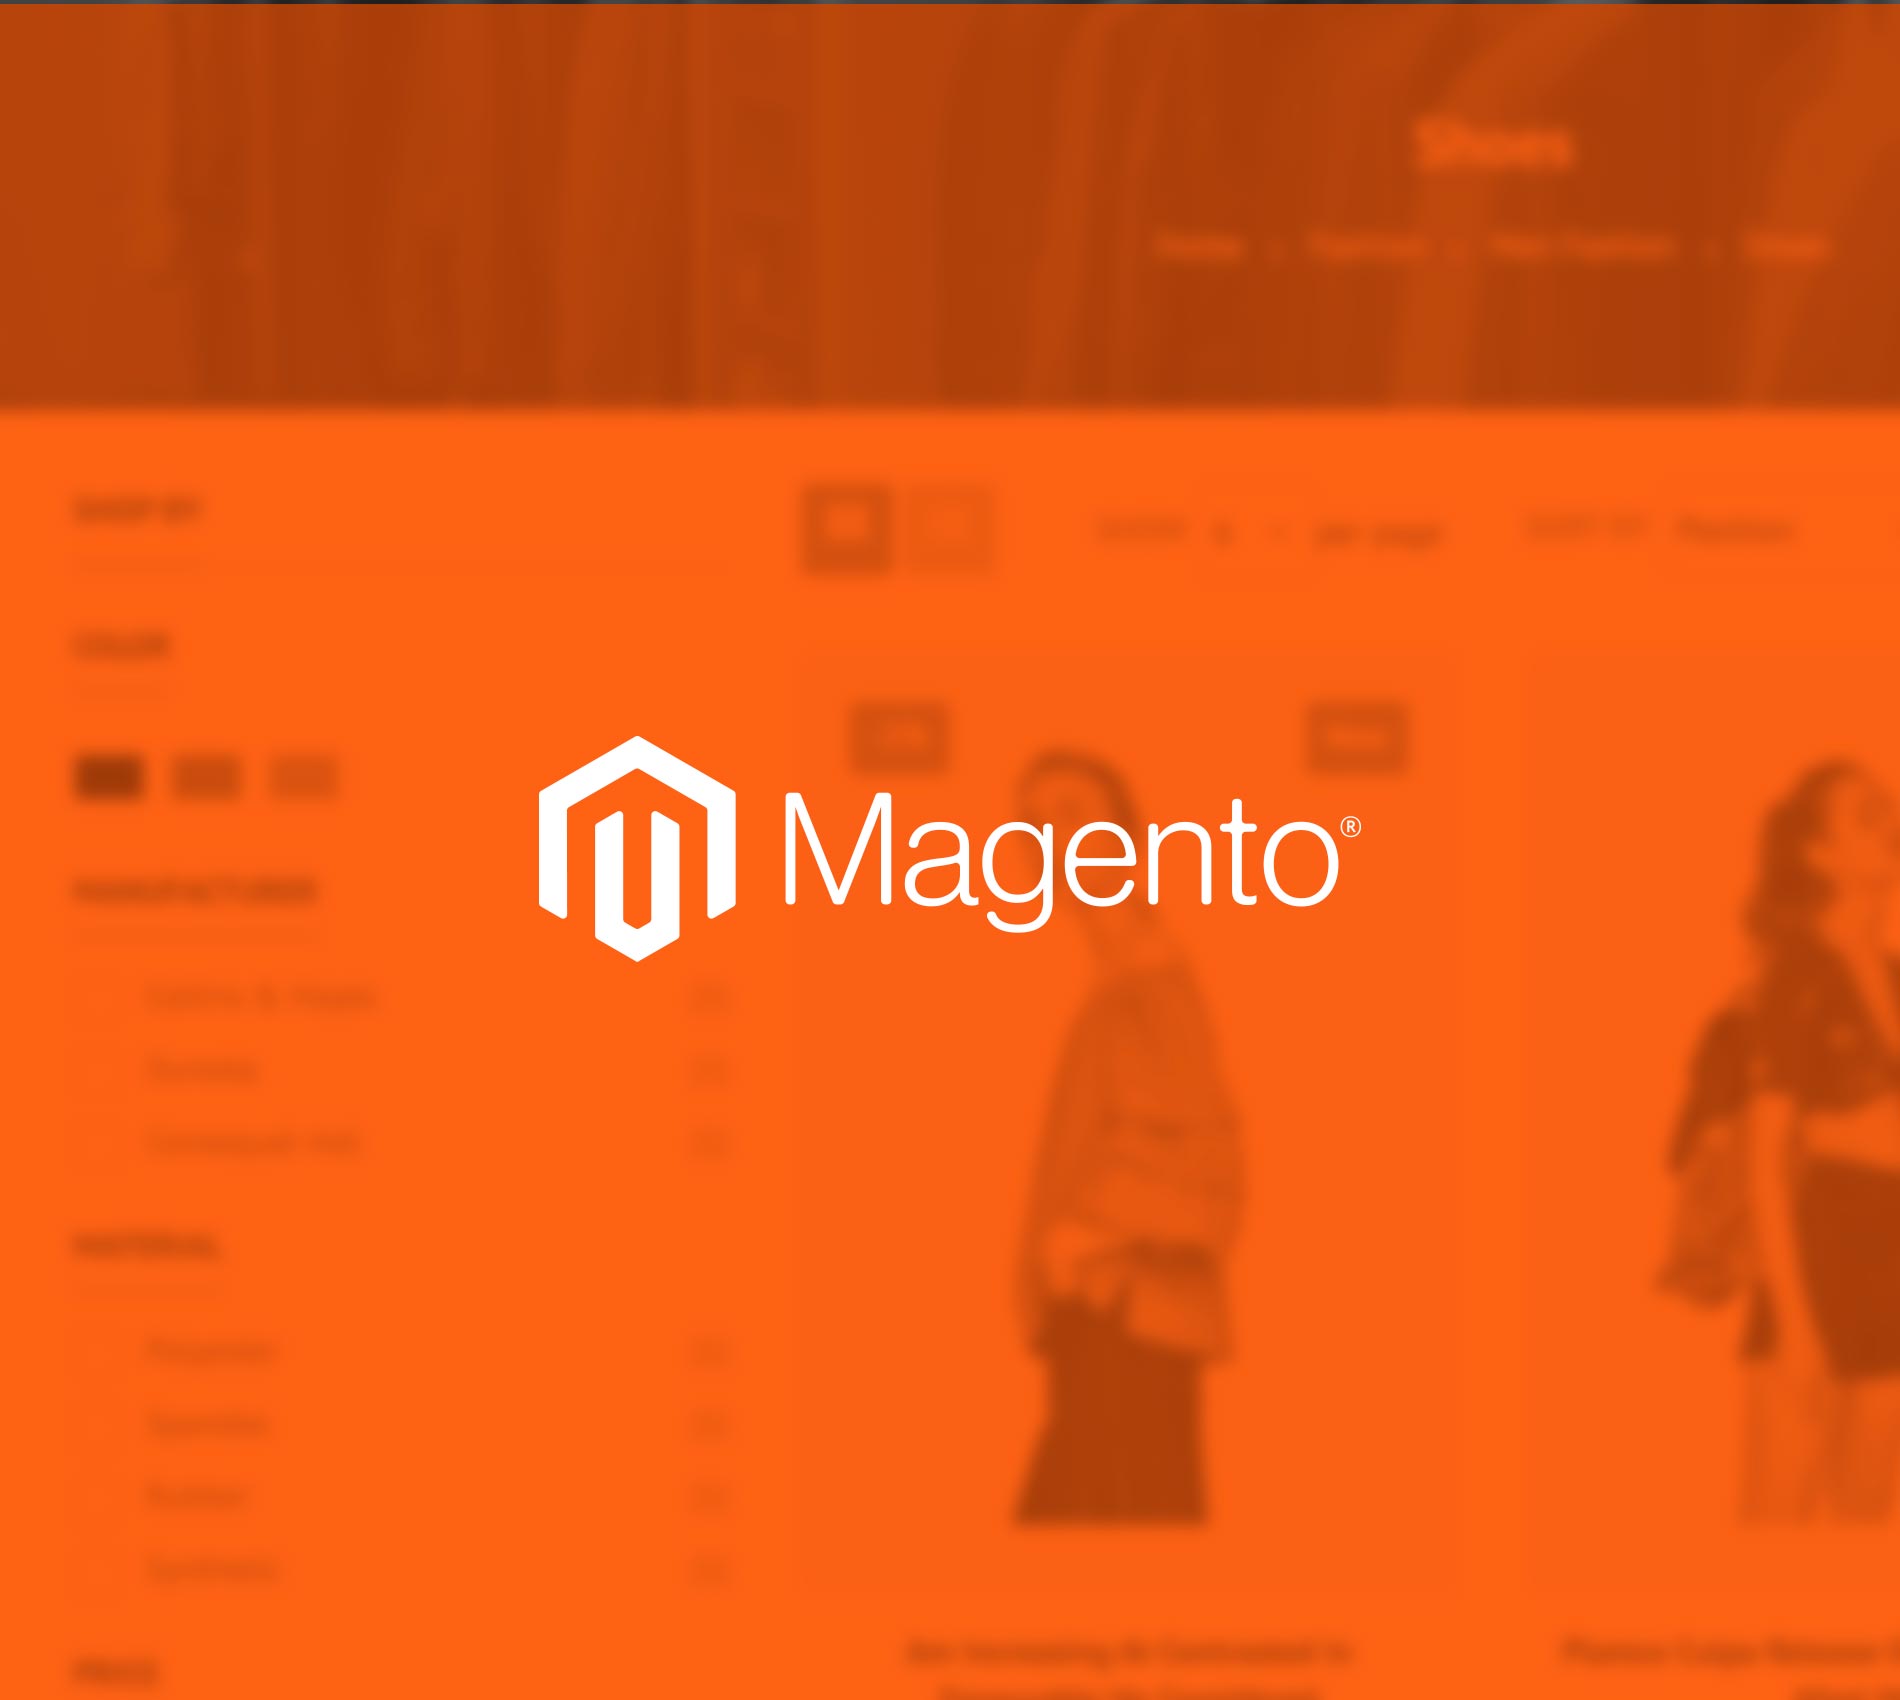 PagBrasil launches Magento payment extension for Brazil